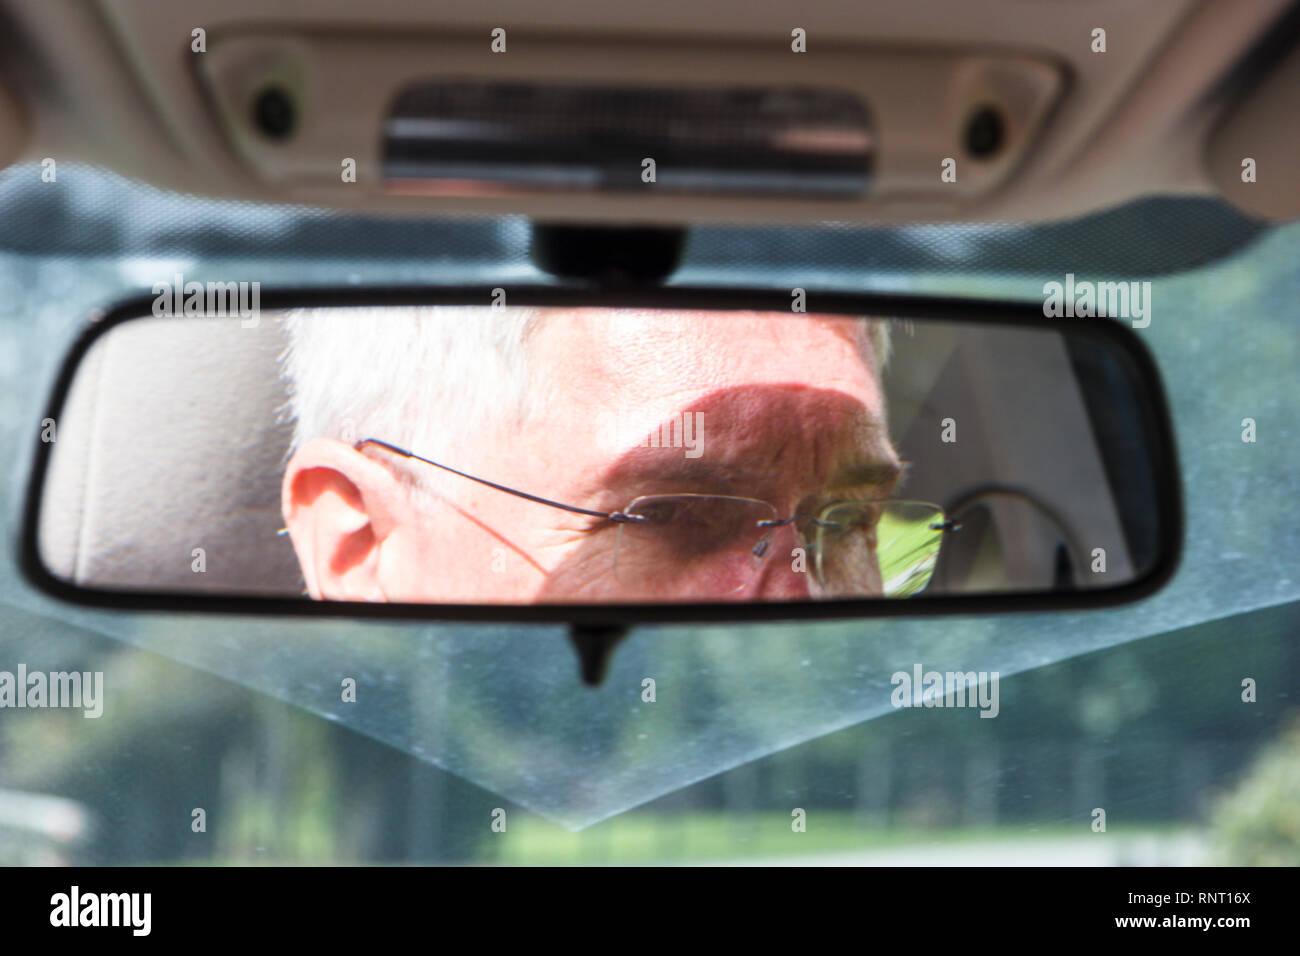 Reflection of an older male driver's head and eyes in the rear view mirror a a car Stock Photo